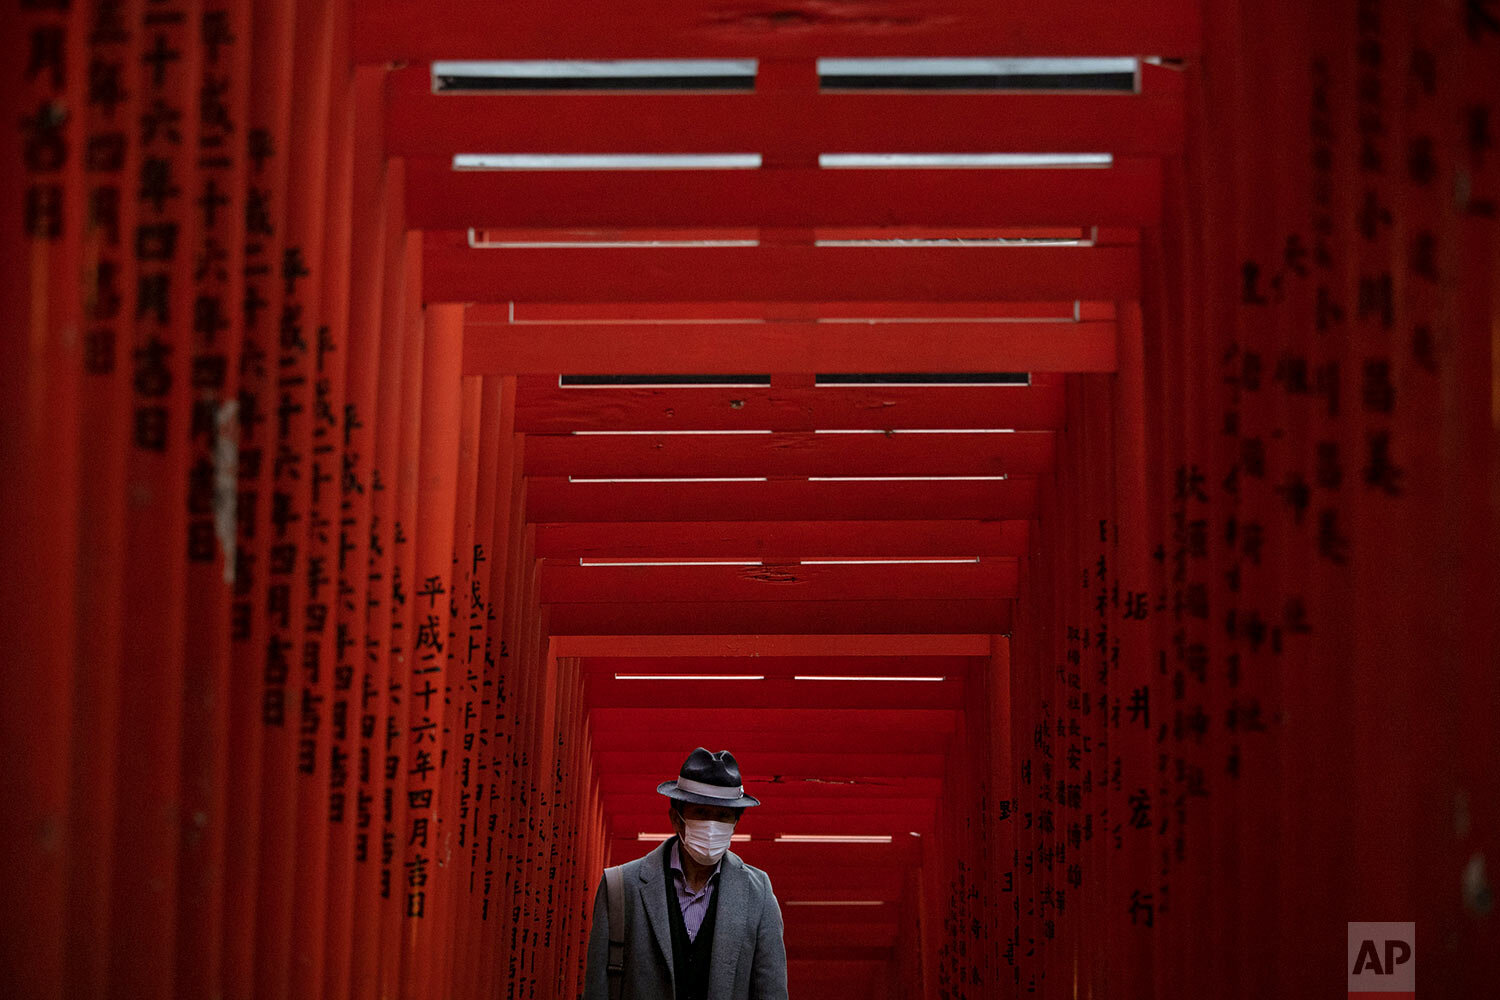  A man with a mask walks through torii gates at the Hie Shrine In Tokyo, Sunday, March 1, 2020.(AP Photo/Jae C. Hong) 